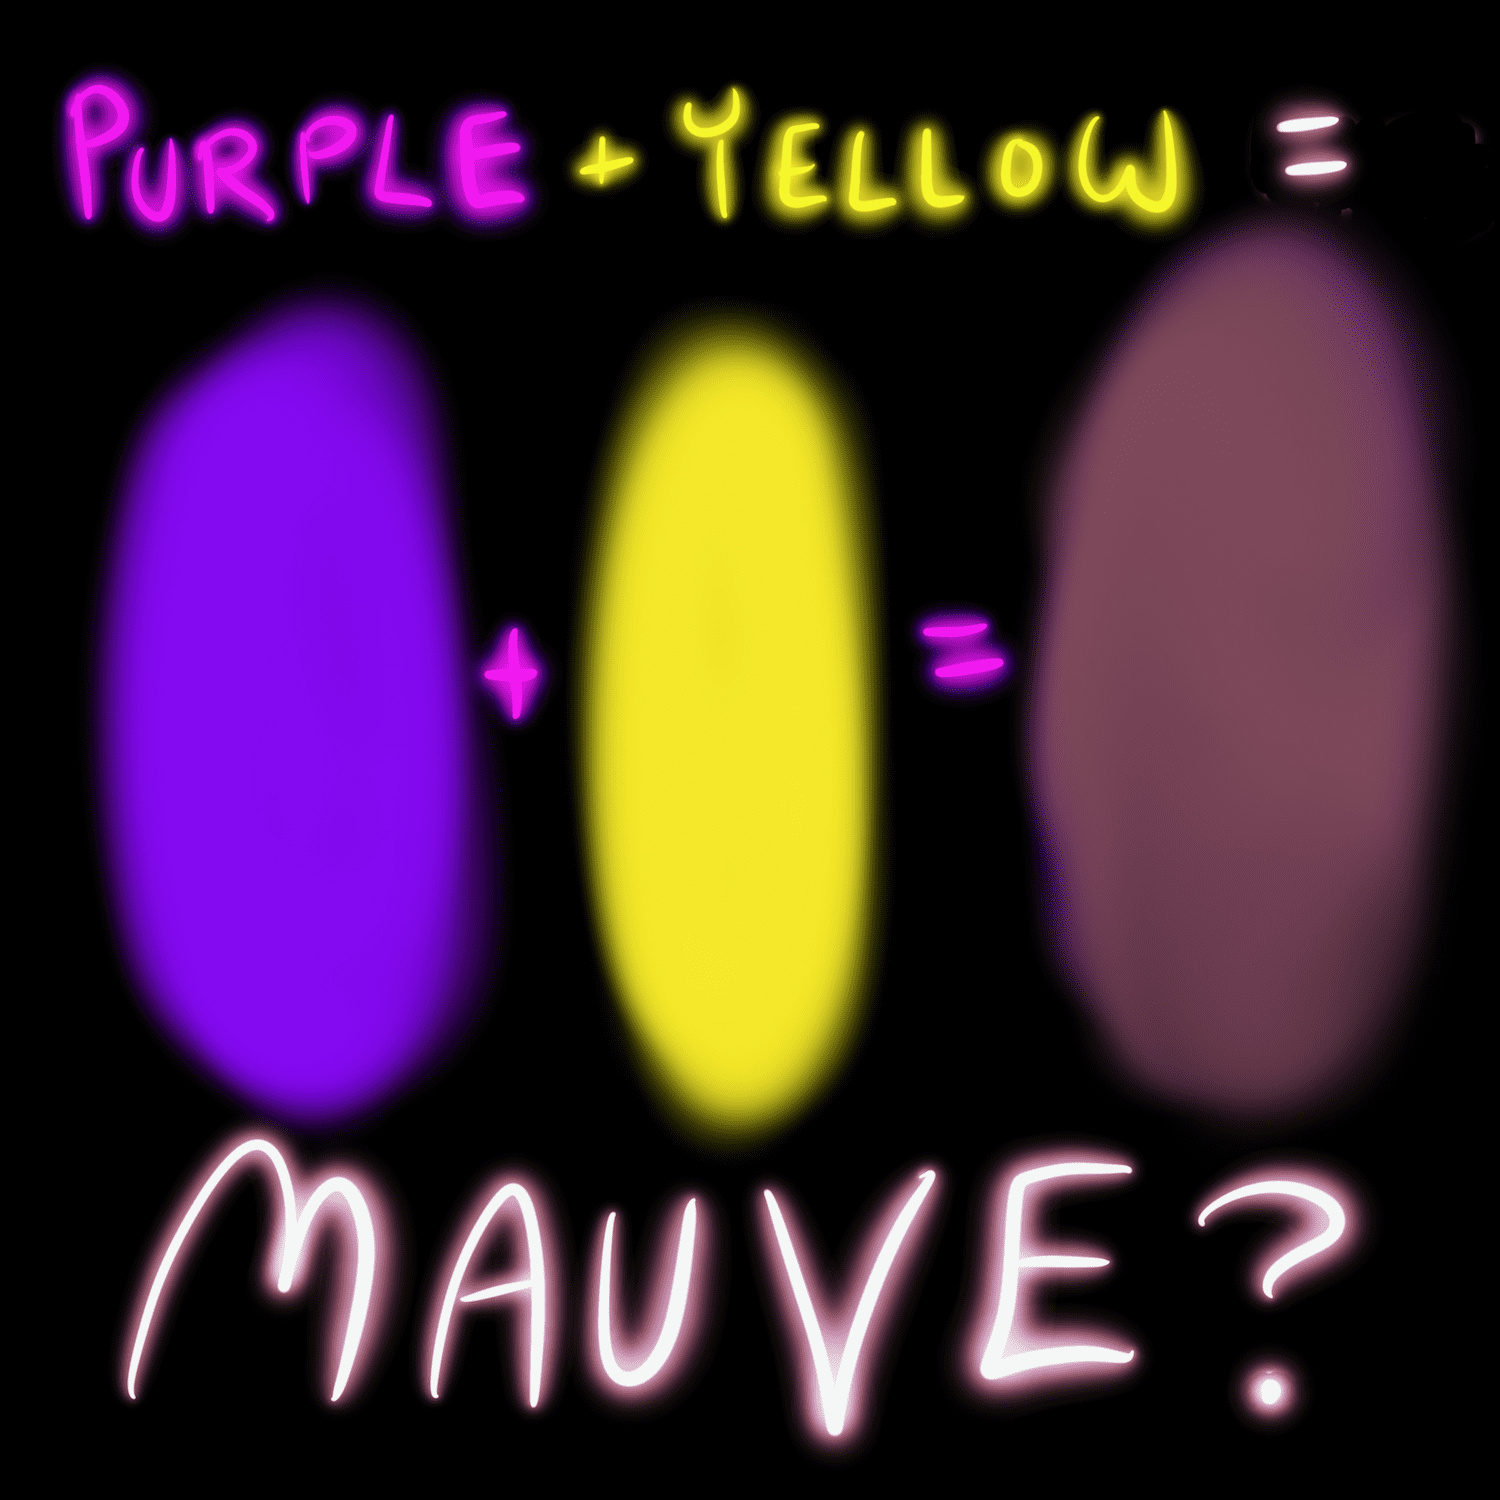 What does yellow and purple make